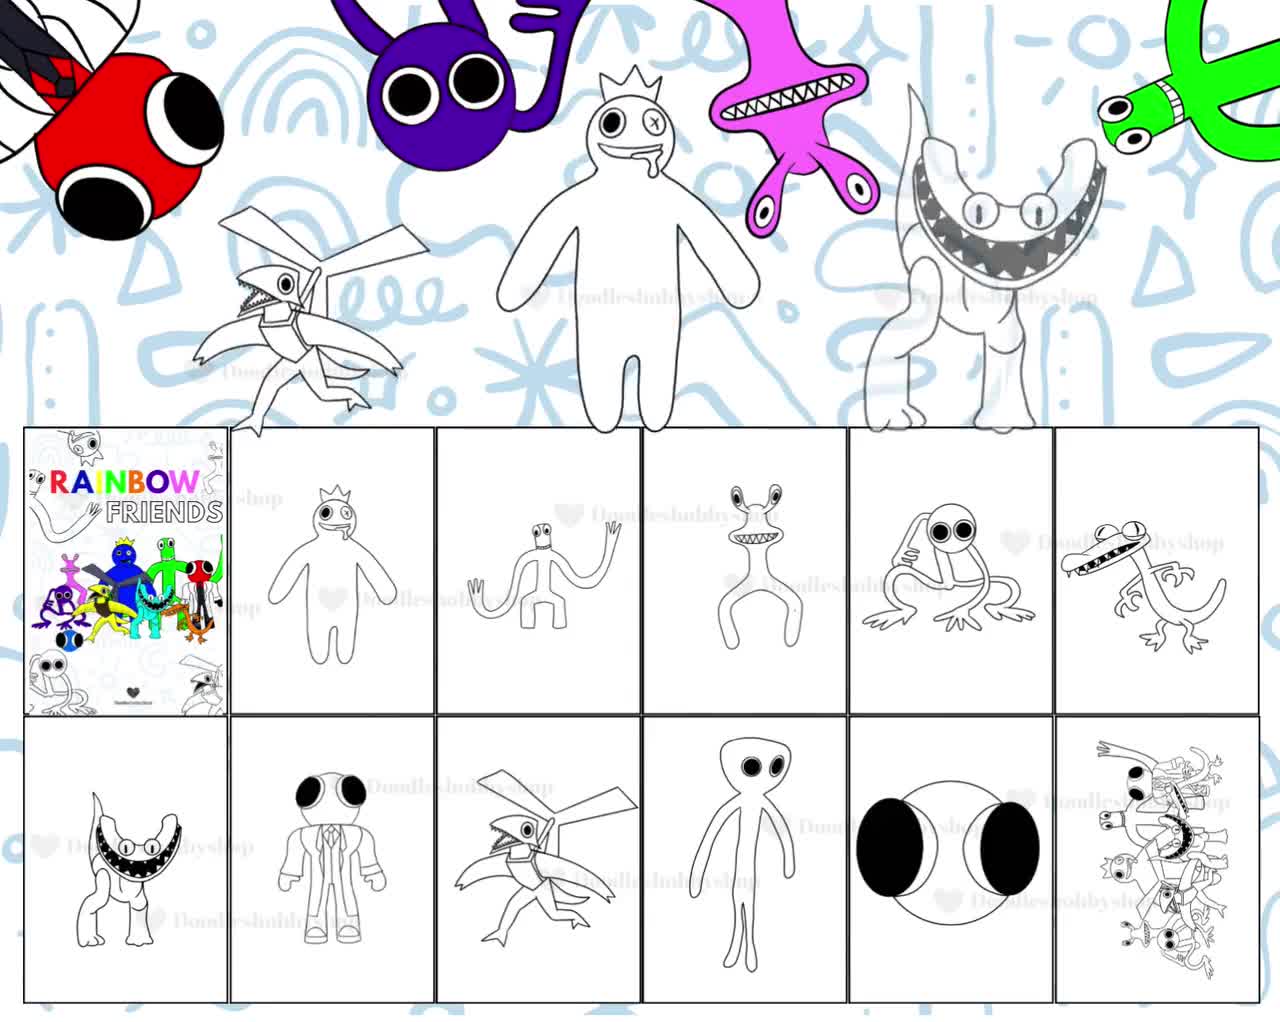 Purple Rainbow Friends Roblox Coloring Page  Coloring pages, Coloring  pages for kids, Colouring pages